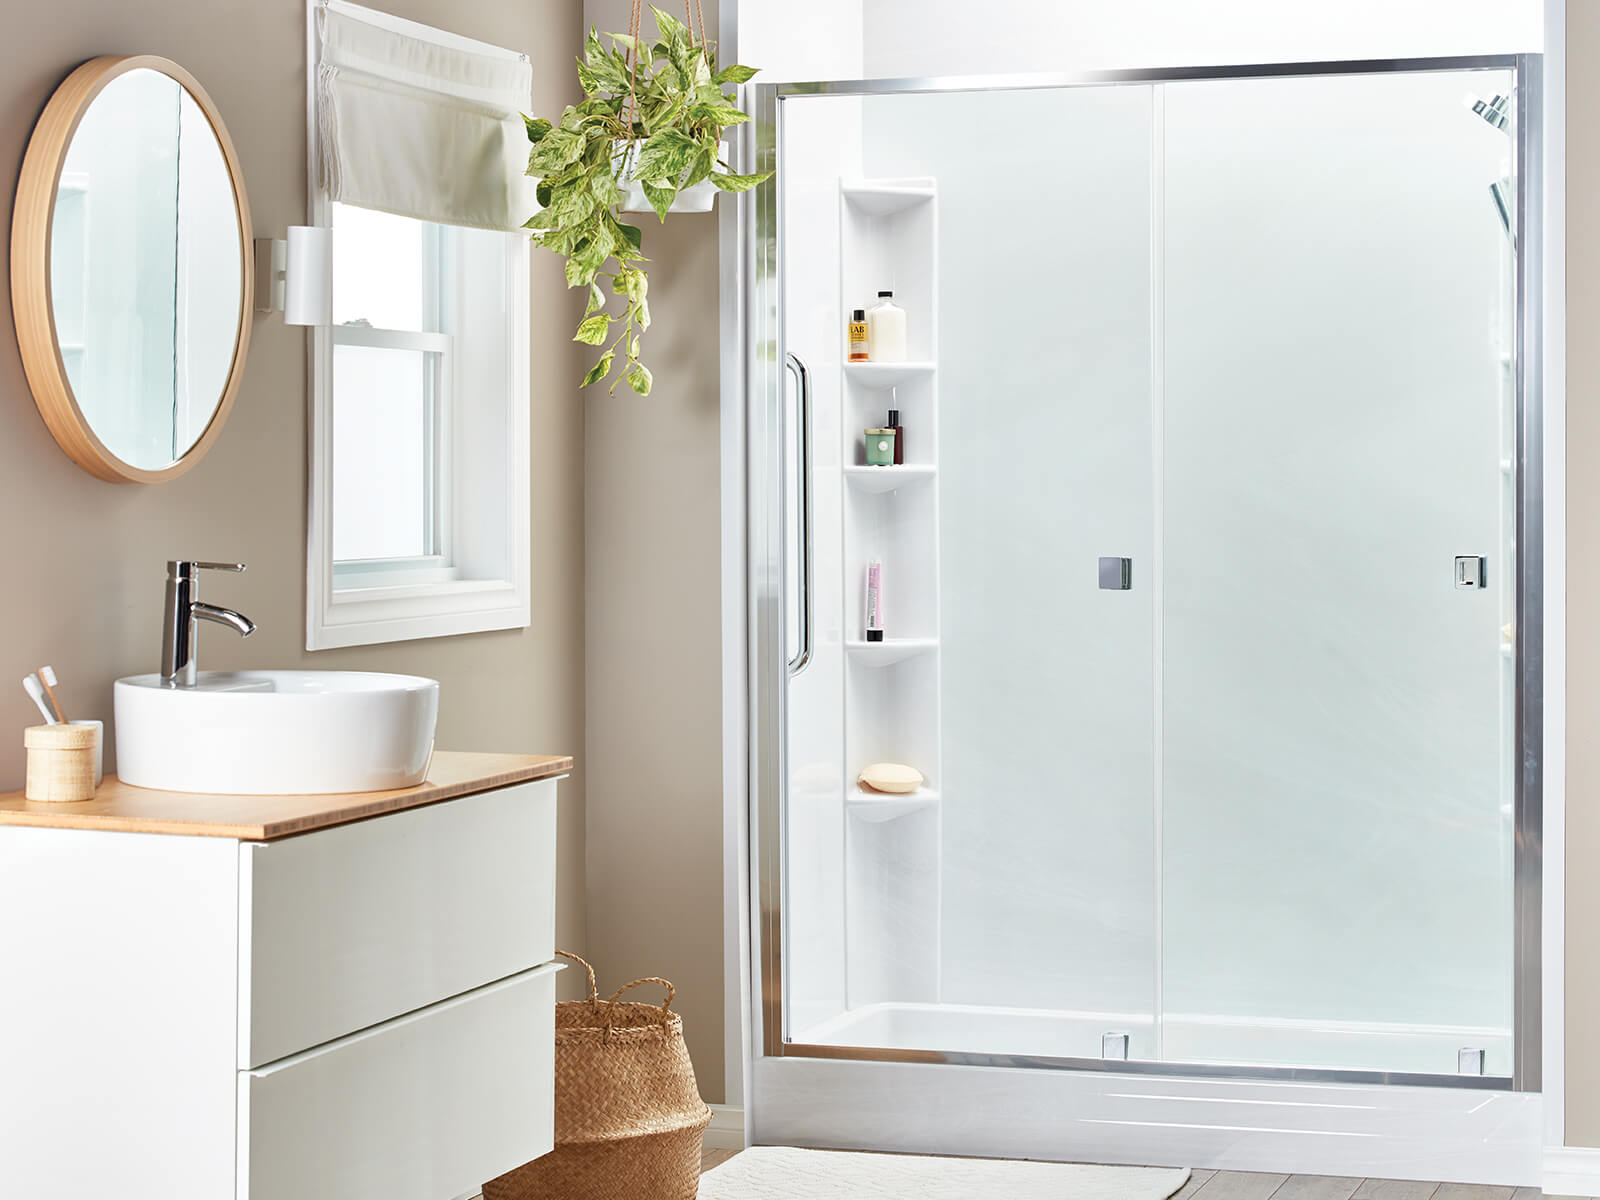 Replace your old bathtub with a new shower!